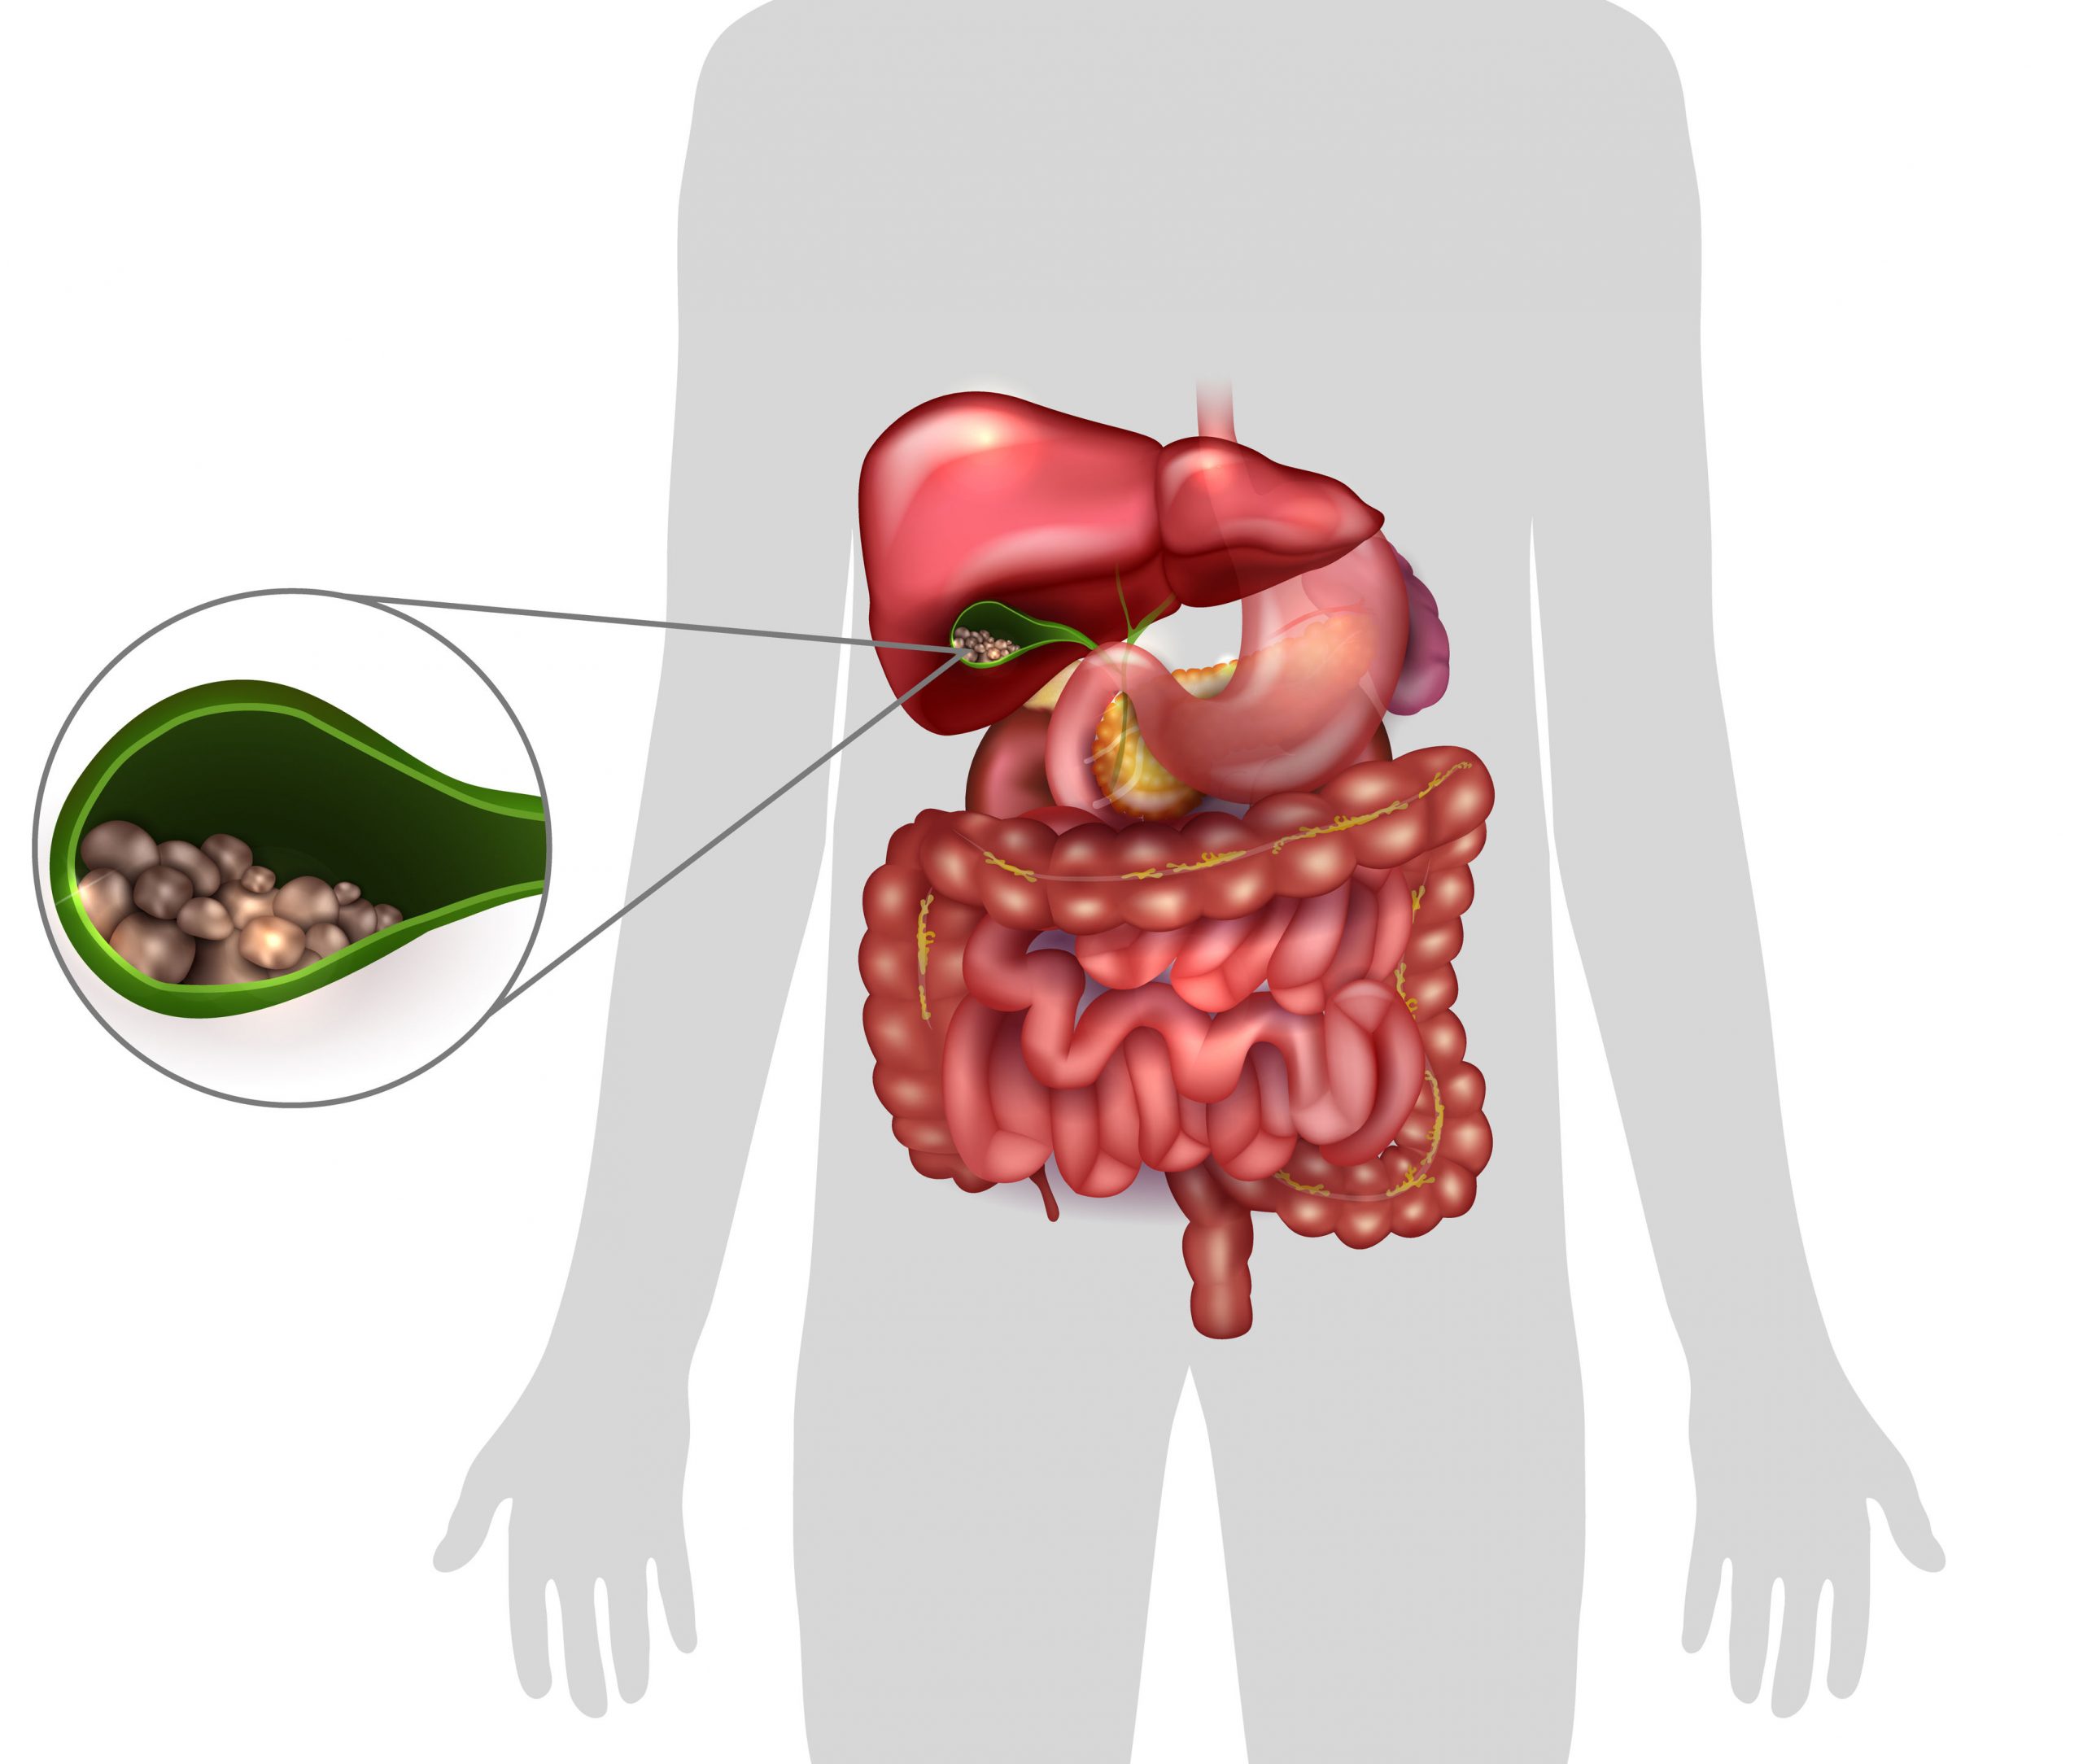 67402631 - gallstones in the gallbladder, human silhouette and anatomy of surrounding organs.